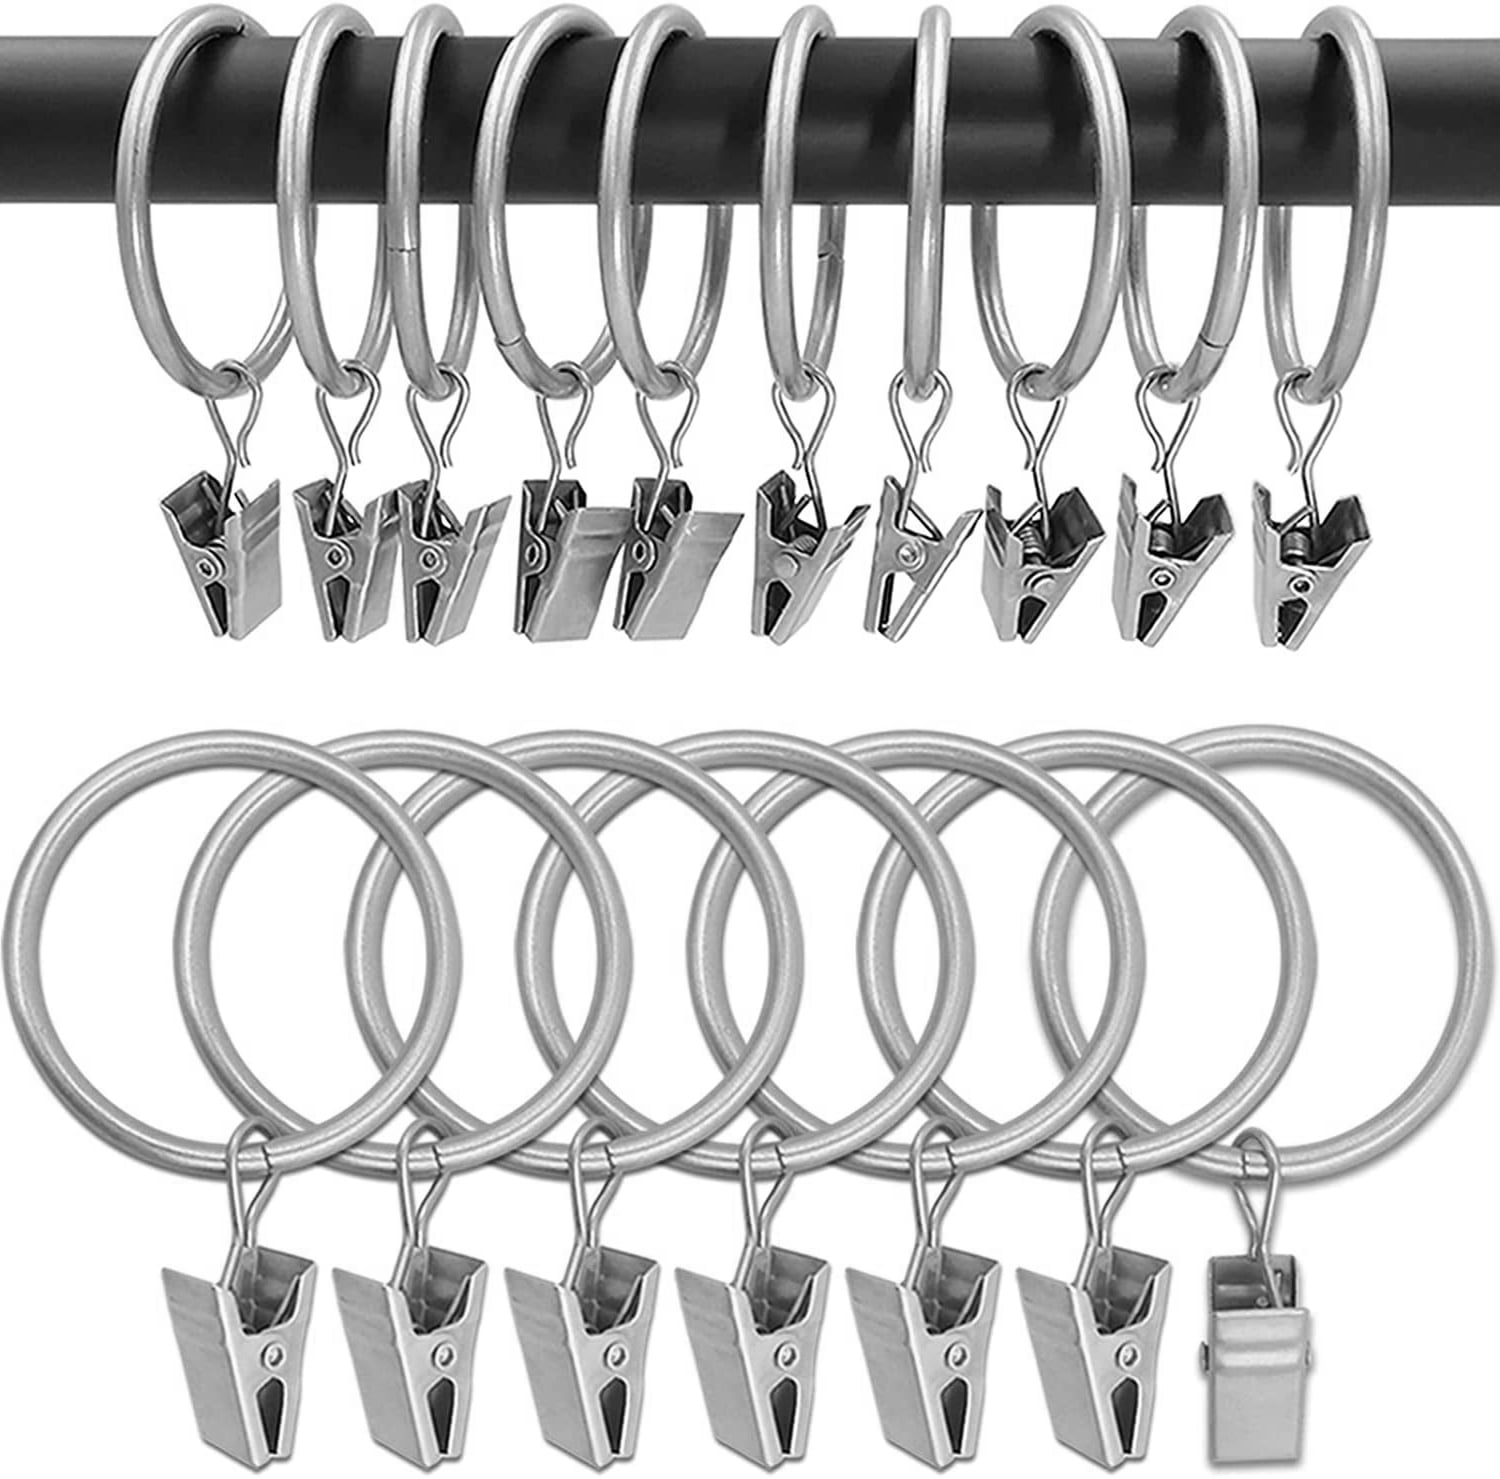 Silver 20 Pcs Metal Drapery Cloth Pegs with Ring Pincer Clip Curtain Rod Rings Drapery Clips Qiorange 20Pcs Curtain Rings Clips 